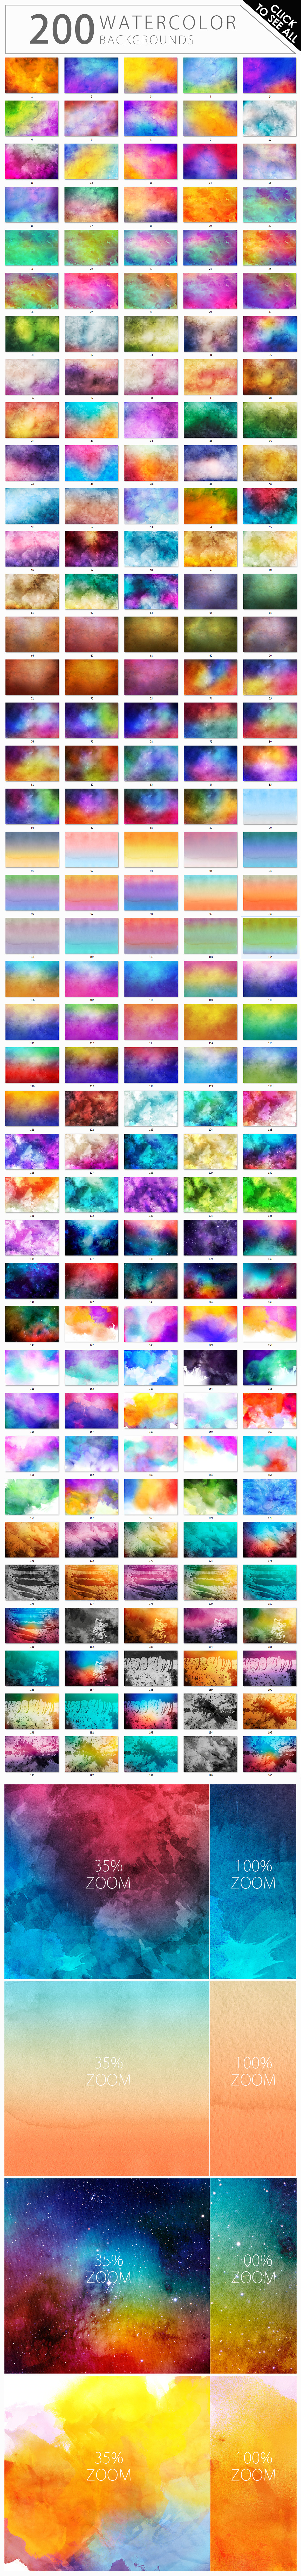  watercolor background - 9